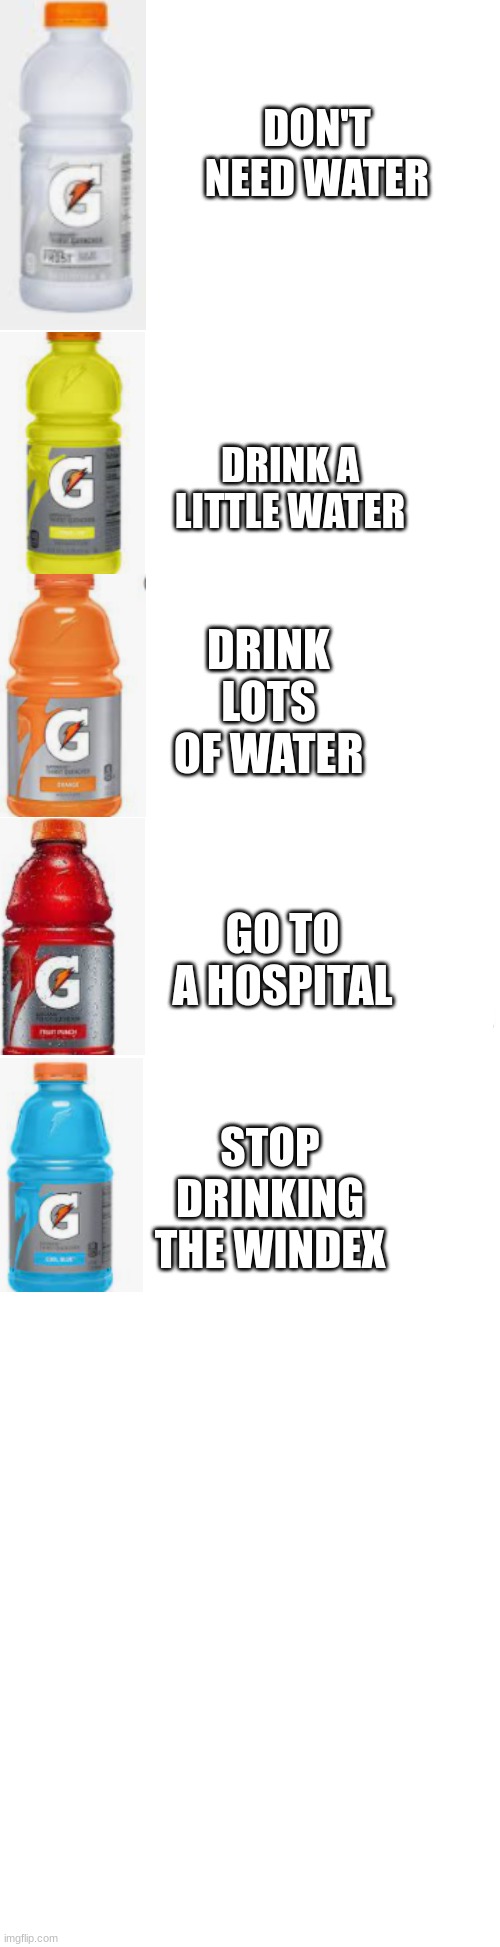 pee test |  DON'T NEED WATER; DRINK A LITTLE WATER; DRINK LOTS OF WATER; GO TO A HOSPITAL; STOP DRINKING THE WINDEX | image tagged in r | made w/ Imgflip meme maker